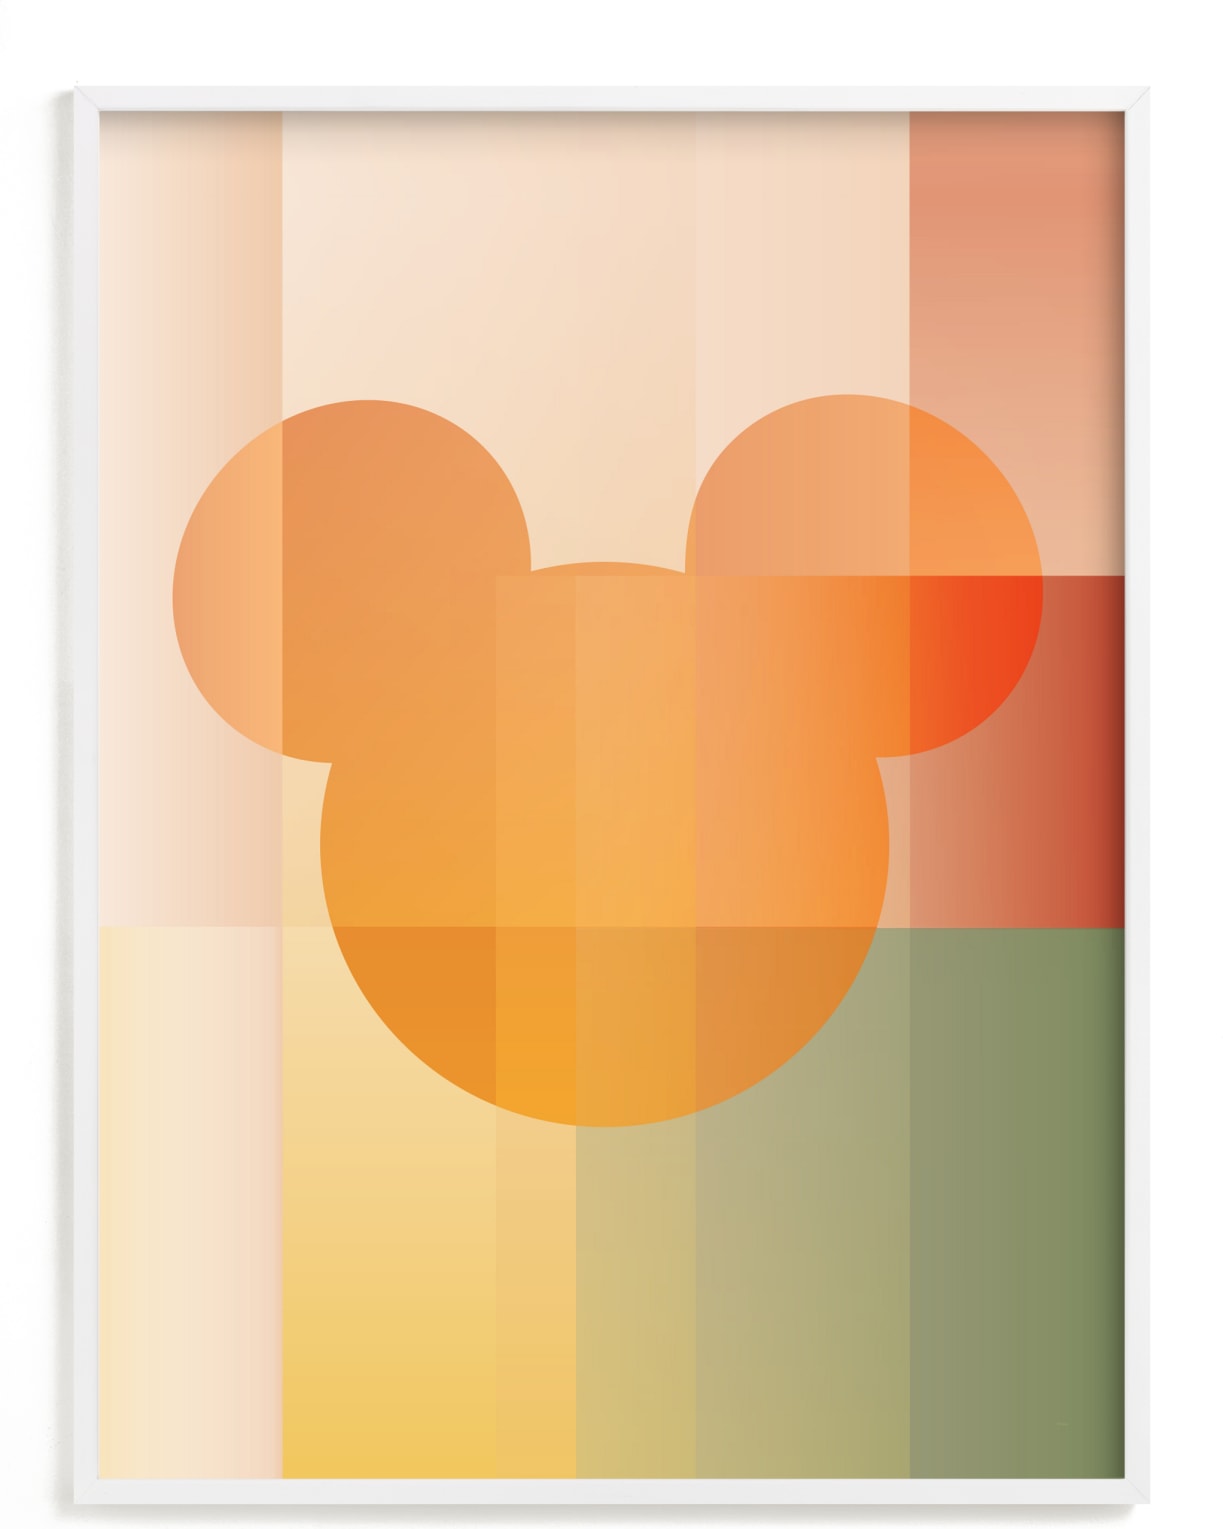 This is a colorful disney art by Baumbirdy called Disney's Mickey Gradient Silhouette.